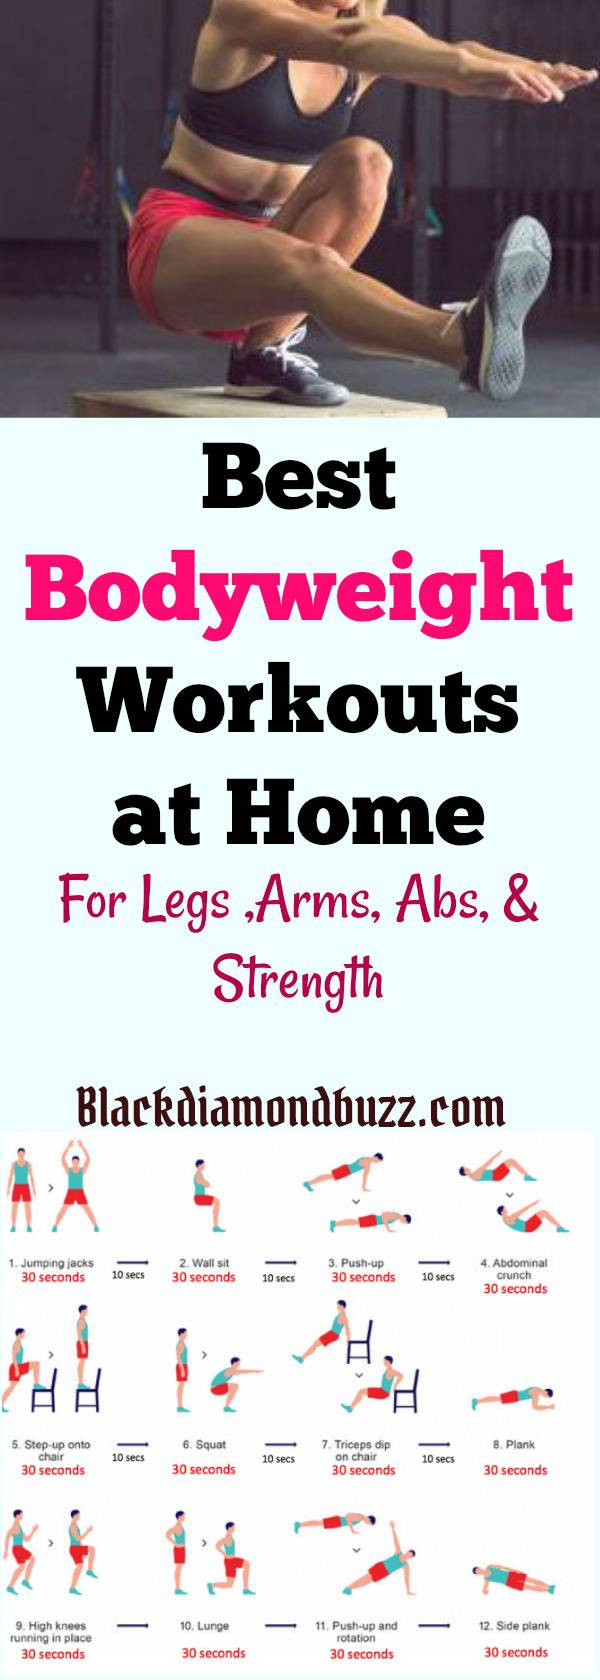 Weight Loss Exercises At Home For Women Videos
 7 Best Bodyweight Exercises for Weight Loss at Home For